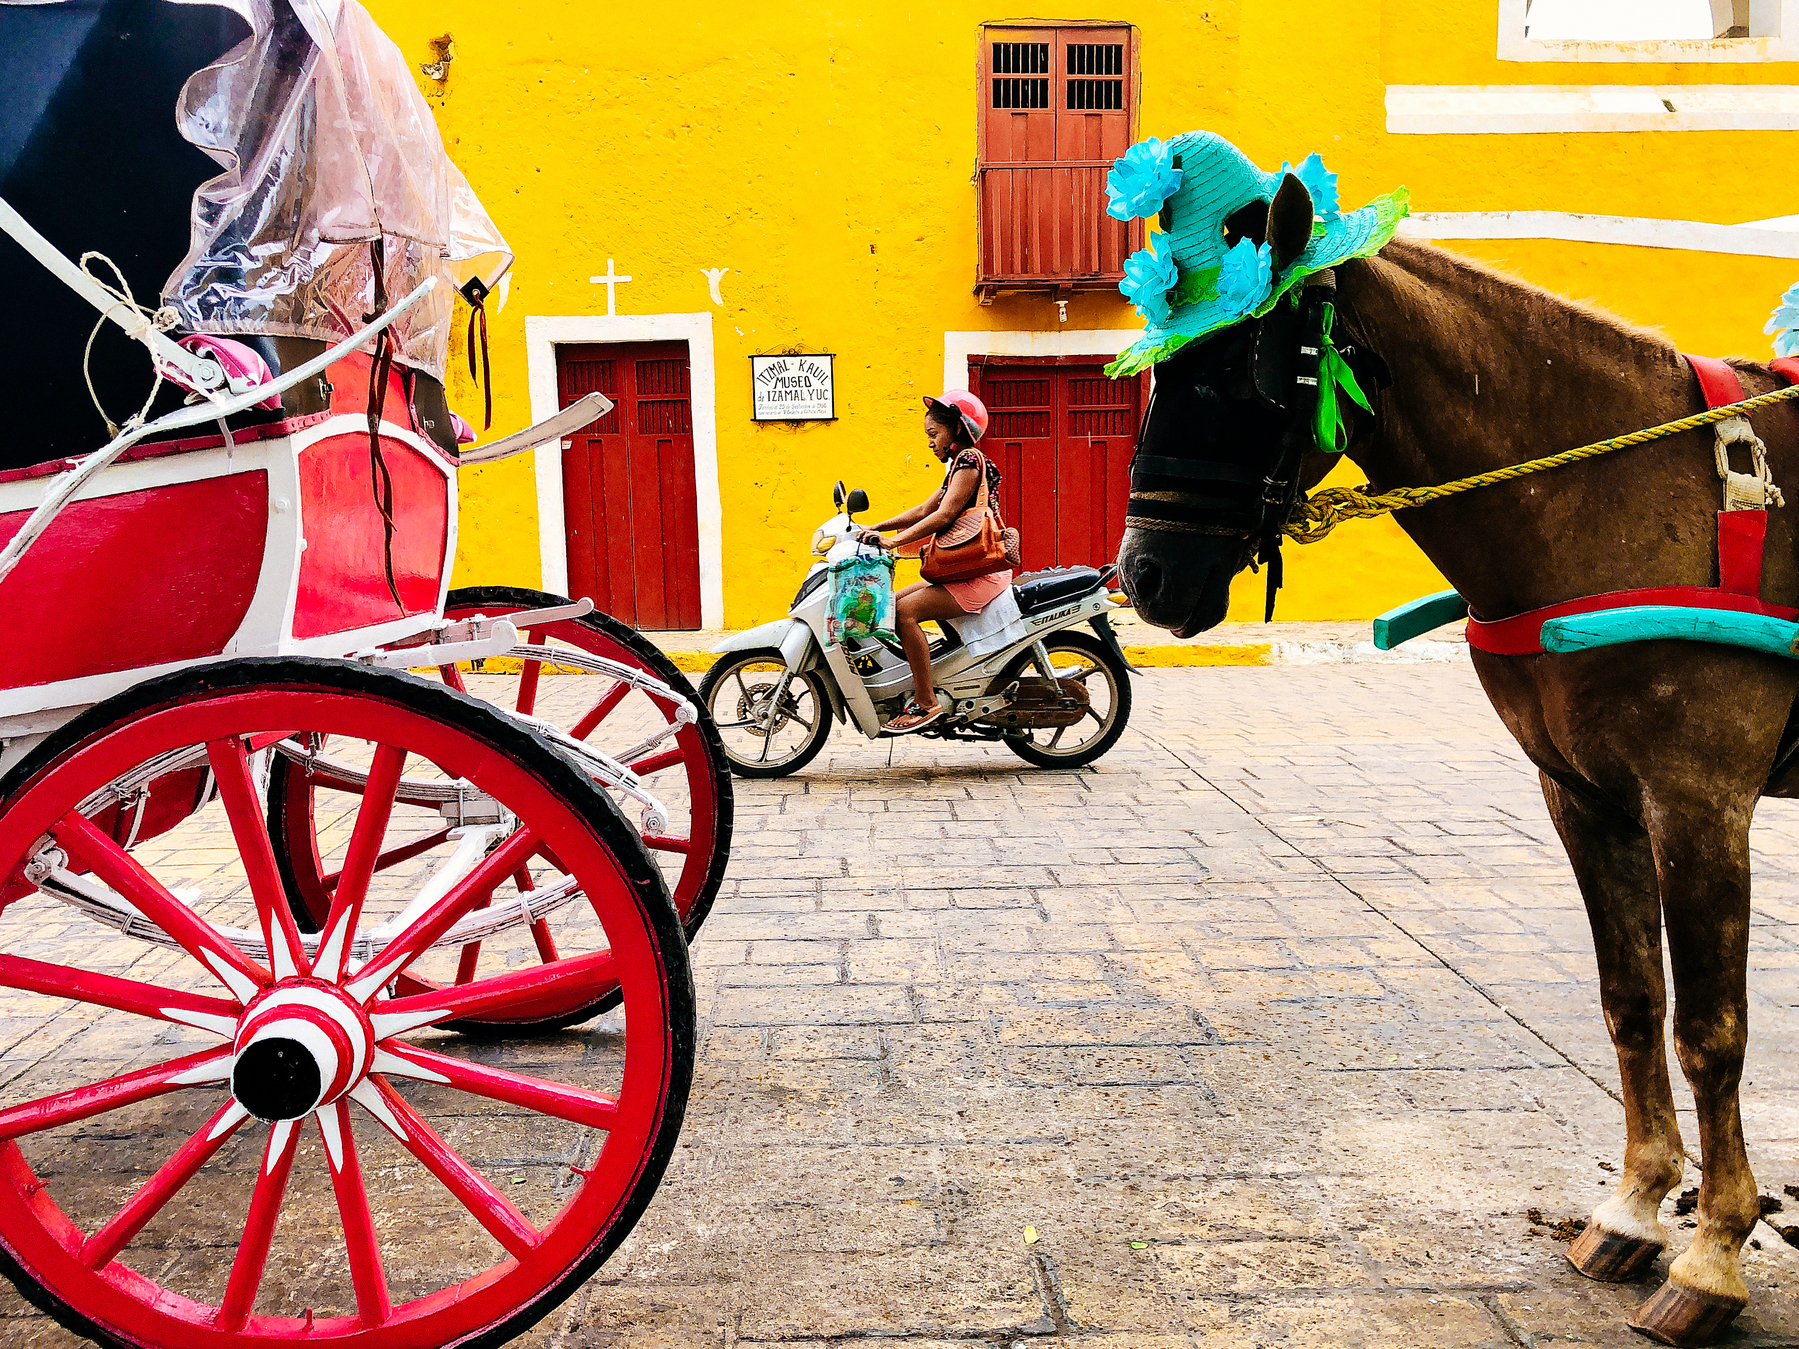 A horse with blue adornments, and a red and white carriage, stand on a paved street next to a building with a yellow facade and a red door. In the background, a person rides a scooter past another red door. 